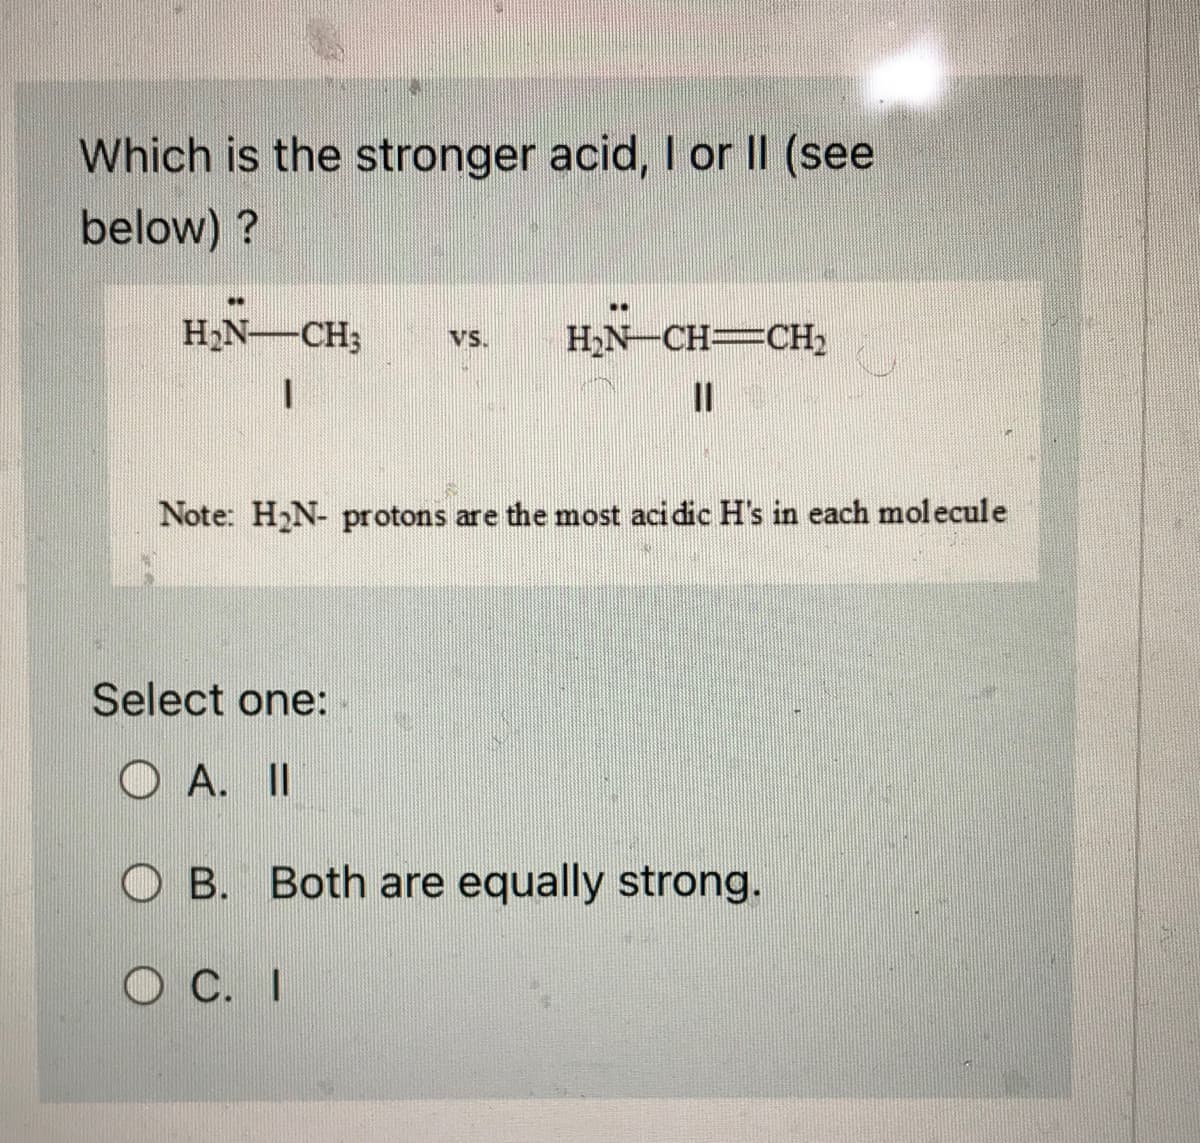 Which is the stronger acid, I or II (see
below)?
**
H₂N-CH3 VS. H₂N-CH=CH₂
11
Note: H₂N- protons are the most acidic H's in each molecule
Select one:
OA. II
OB. Both are equally strong.
OC. I